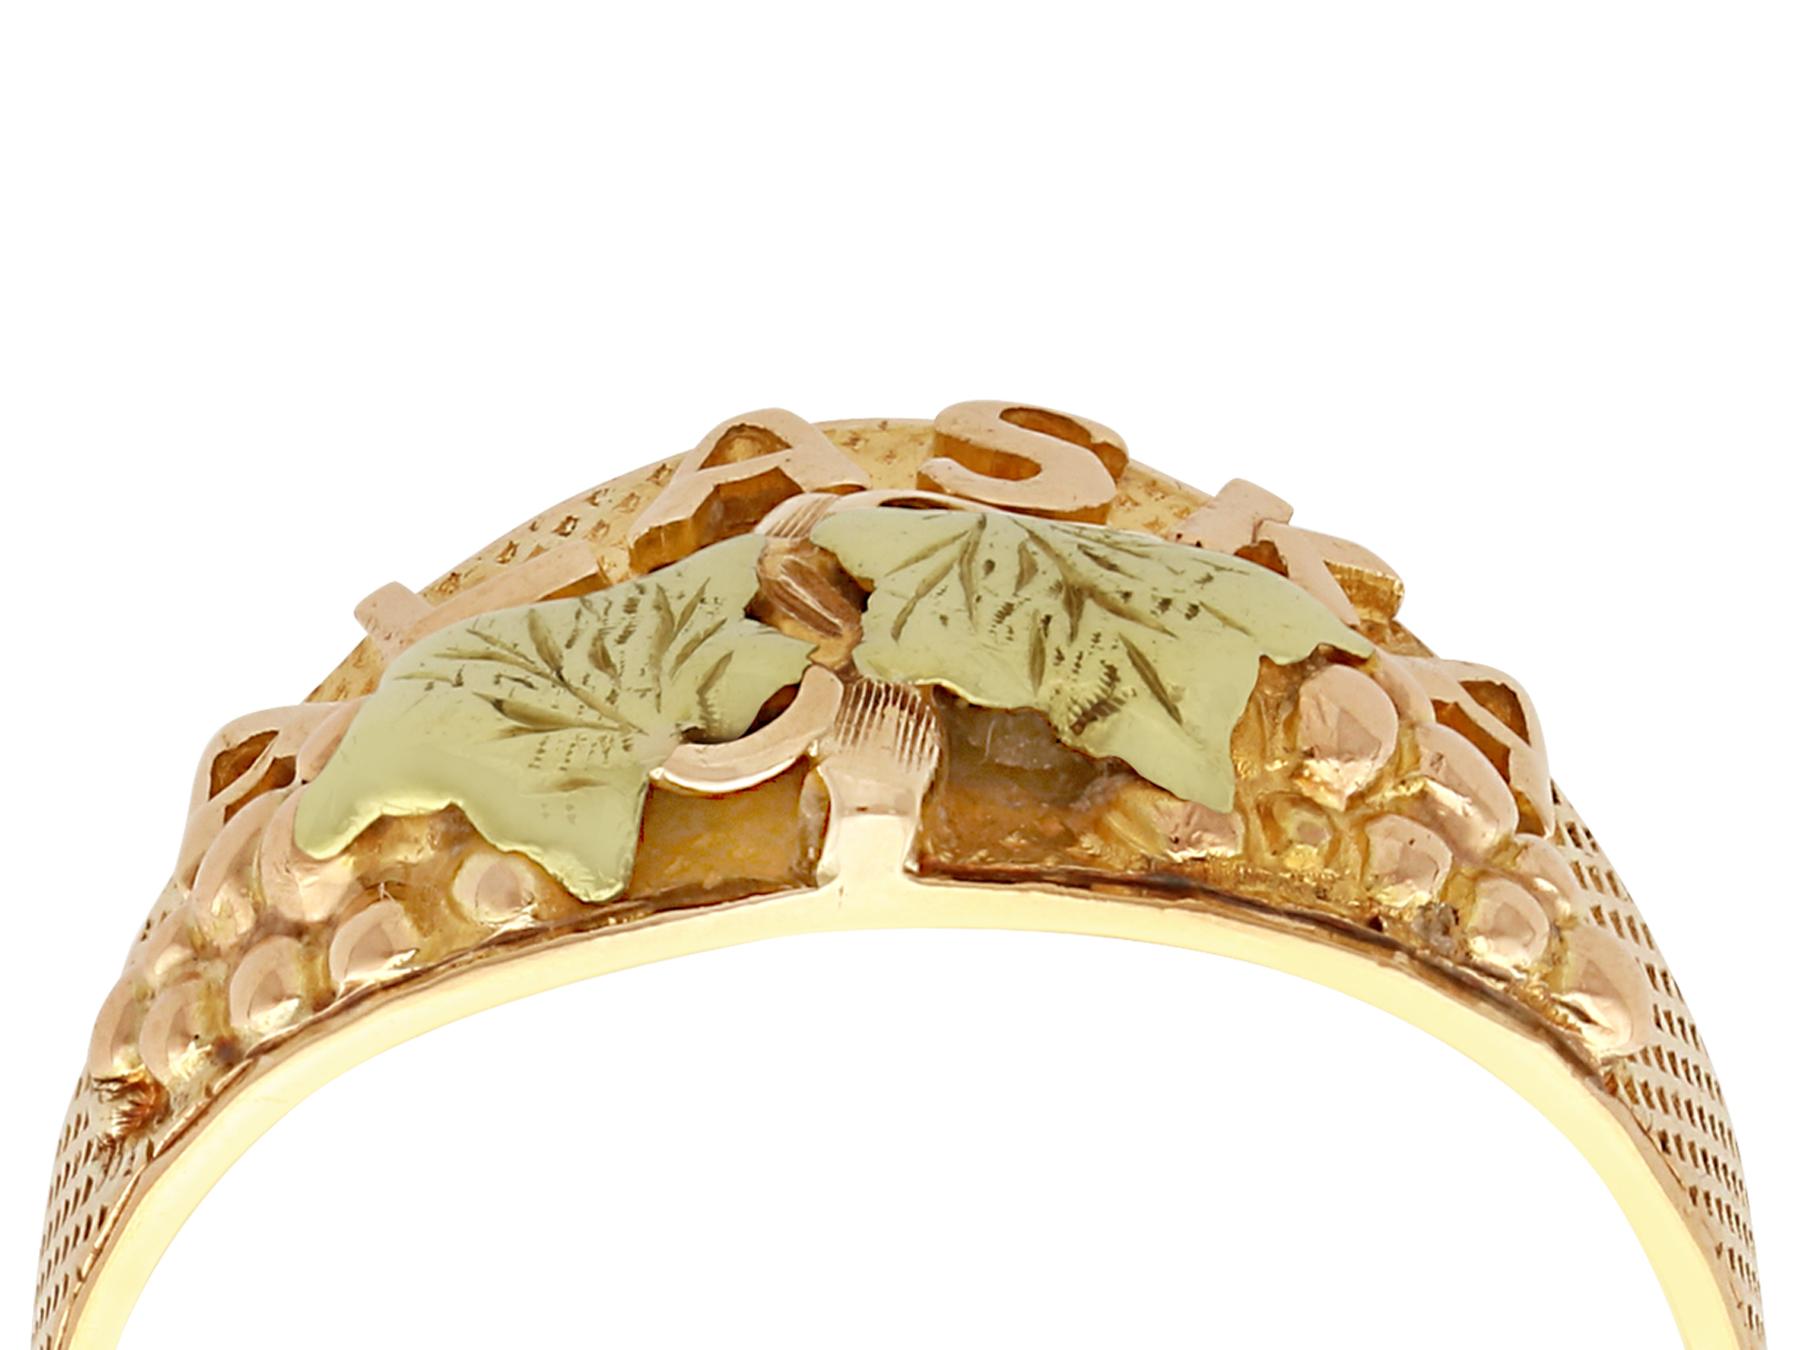 A fine and impressive Black Hills Gold ring in two color 14k gold; part of our jewelry and estate jewelry collections.

This fine and impressive 'Black Hills'* ring has been crafted in two tone 14k yellow gold.

The anterior face of the substantial,